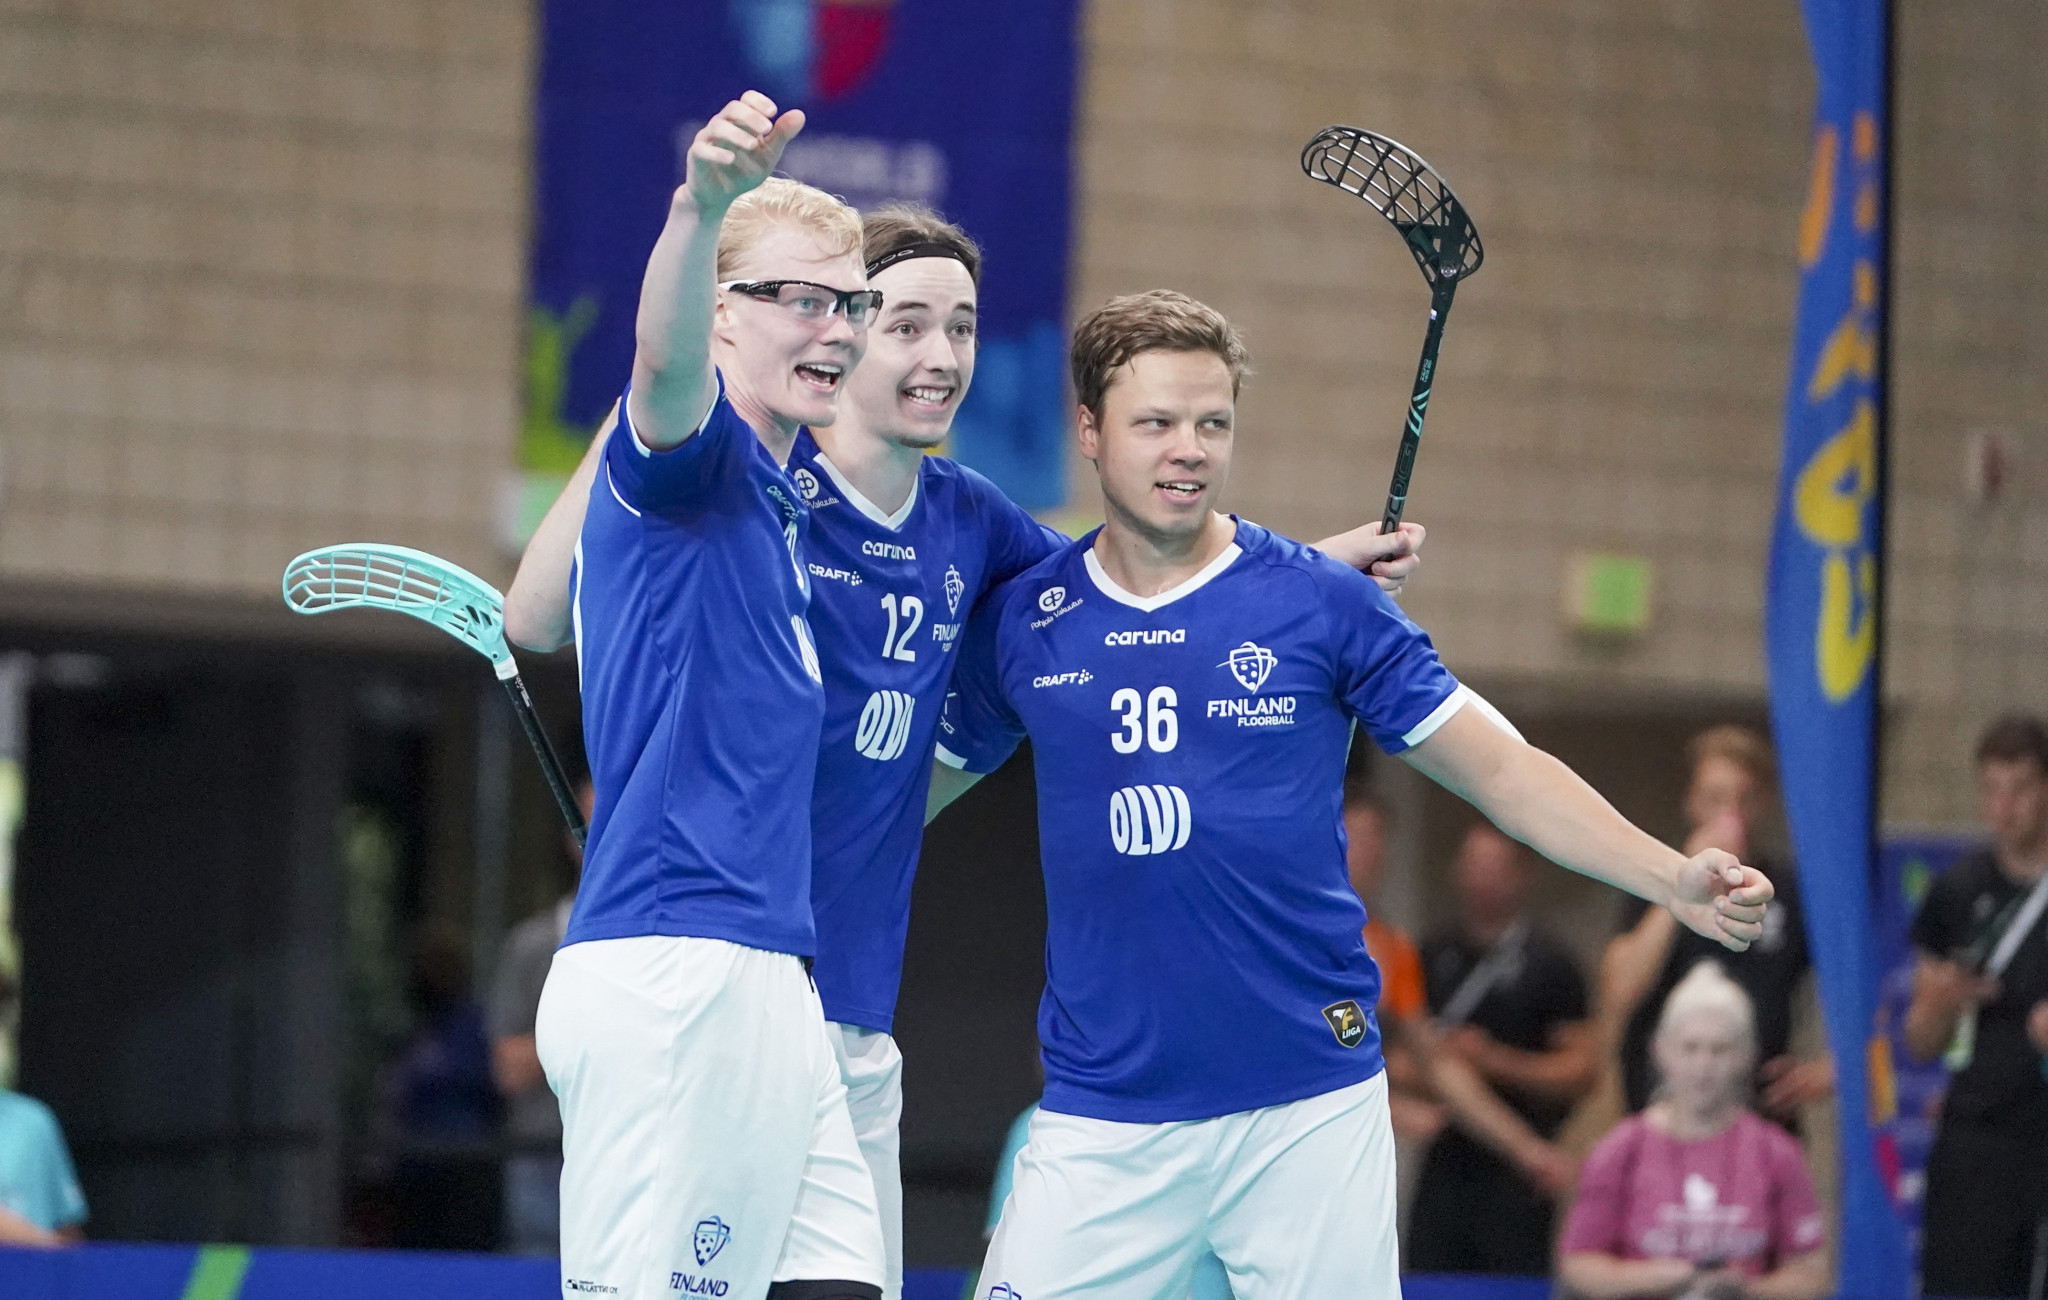 Runners-up Finland have traditionally dominated floorball along with opponents Sweden ©Marvin Gentry/The World Games 2022